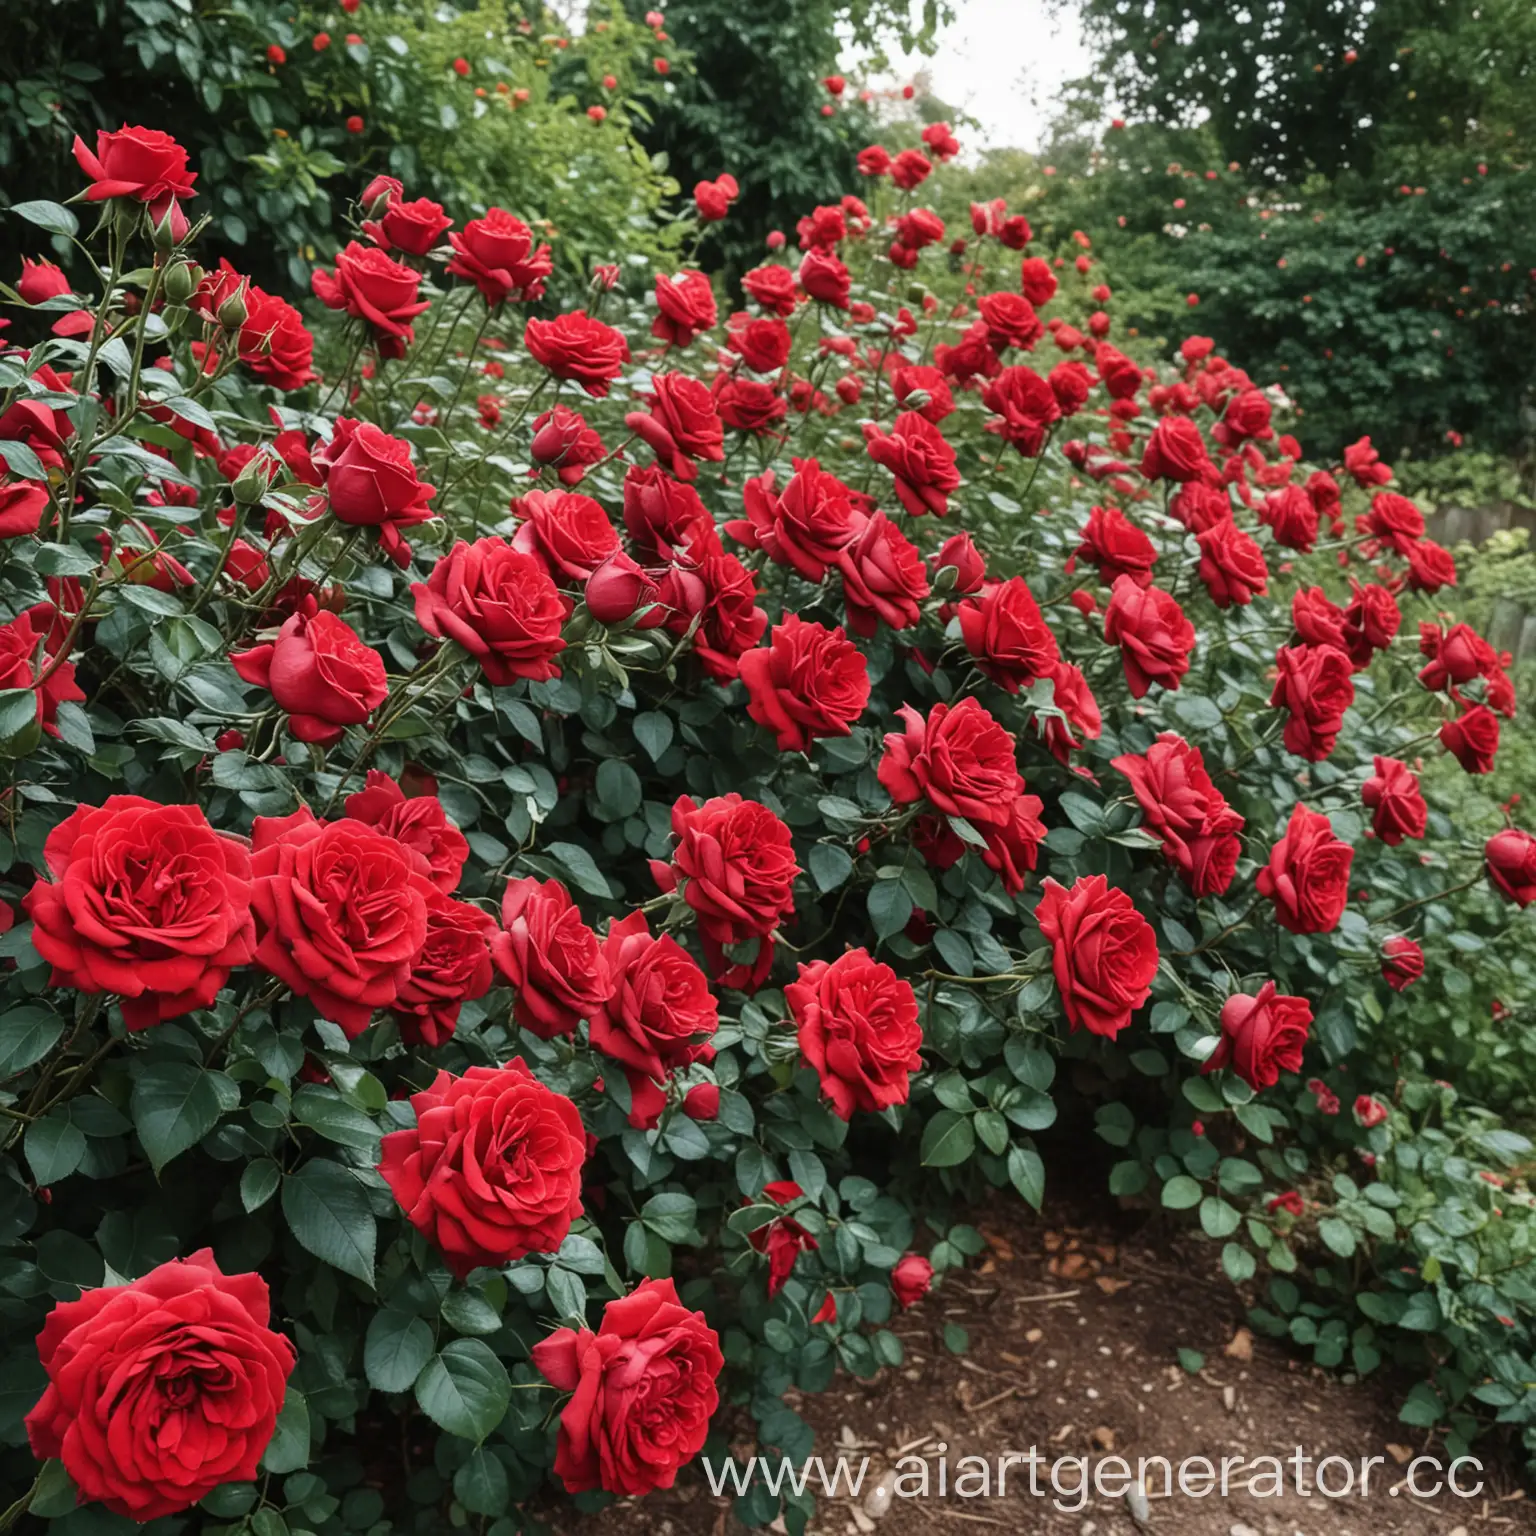 Lush-Garden-Blooming-with-Vibrant-Red-Roses